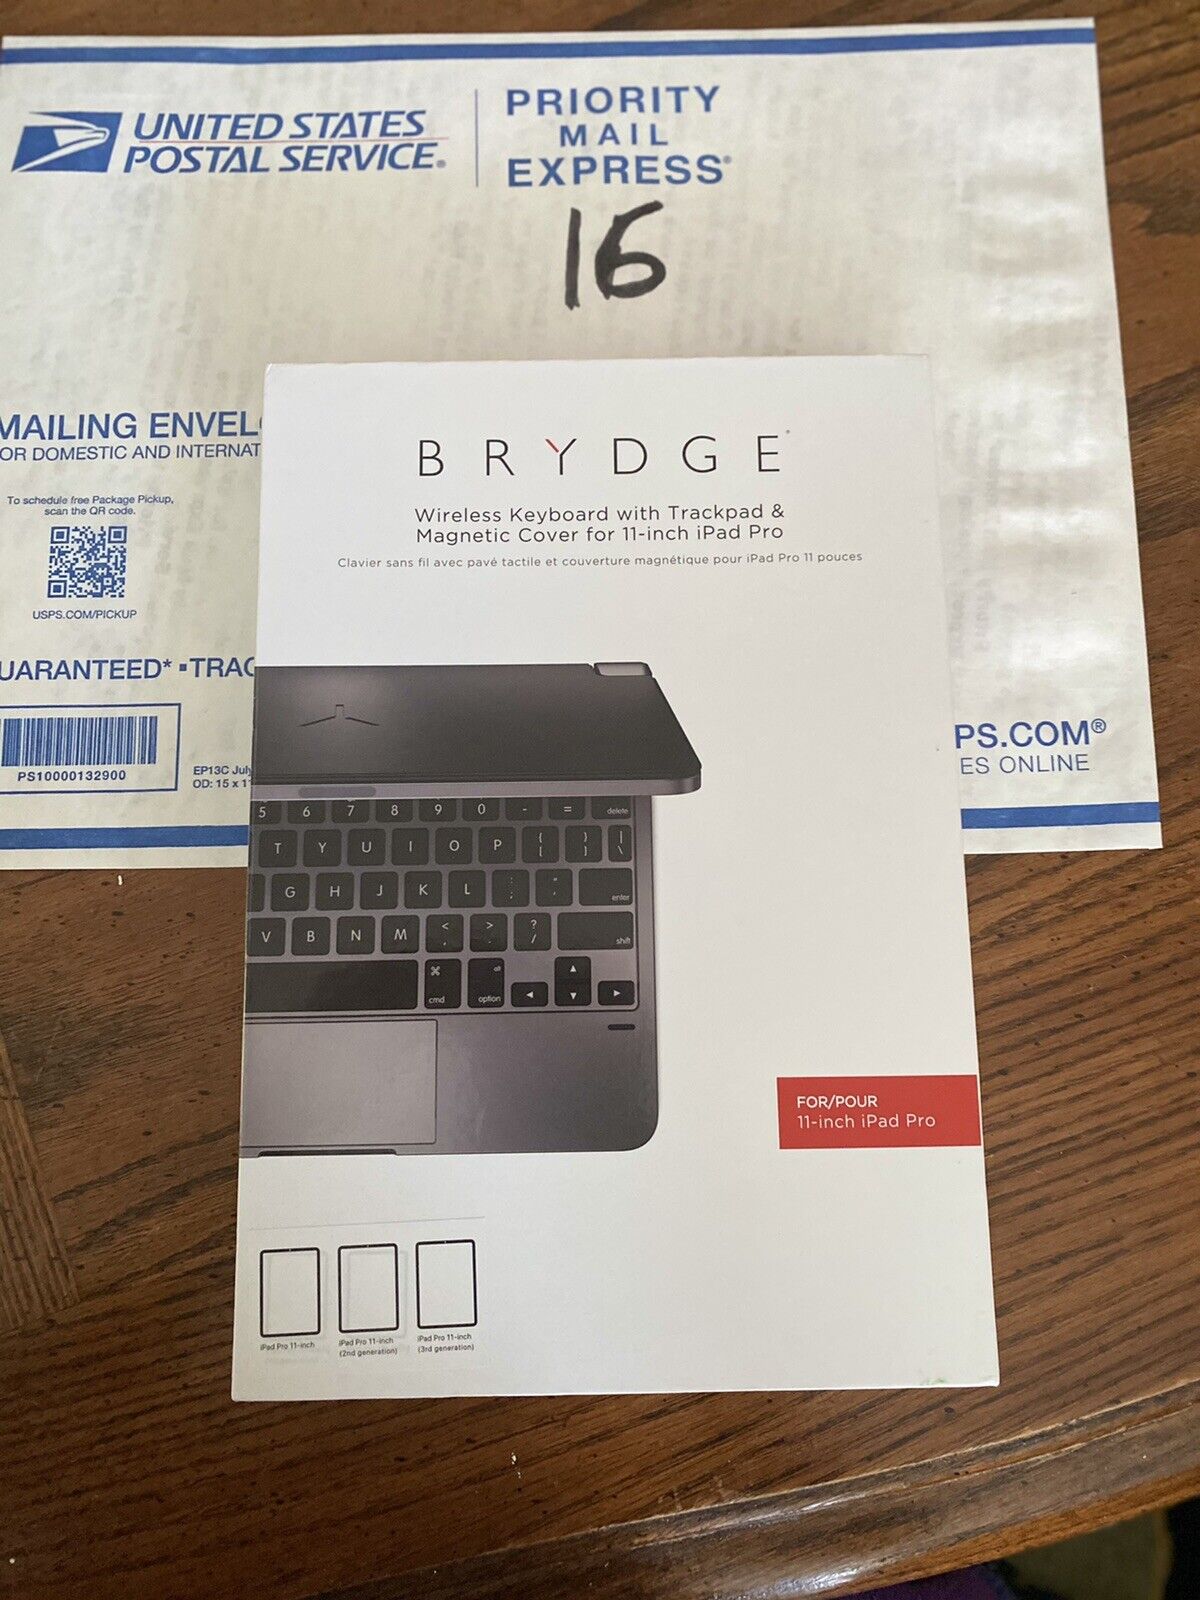 Brydge Wireless Keyboard with Trackpad Magnet Cover for 11 inch iPad Pro